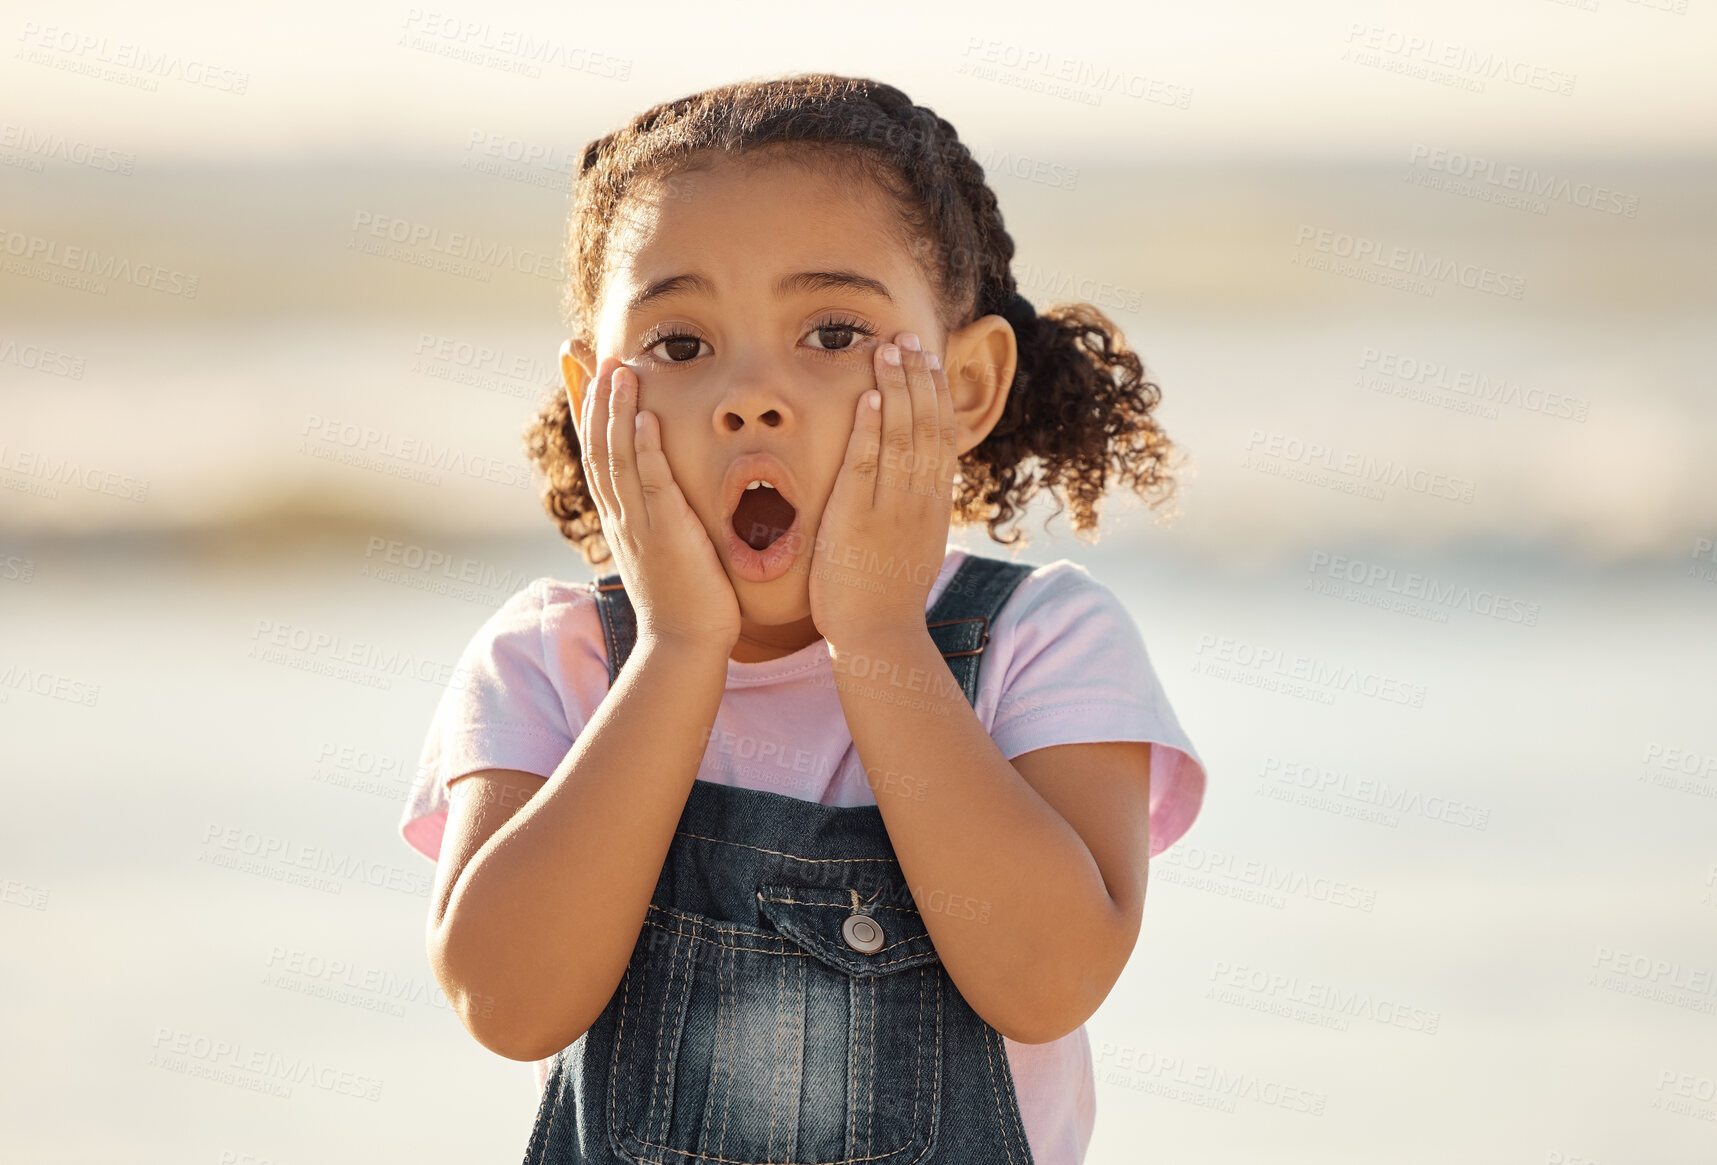 Buy stock photo Wow, children and hands on the face of a girl on the beach looking surprised or shocked outside during summer. Kids, youth and surprise with a little female child feeling shock while outdoor alone